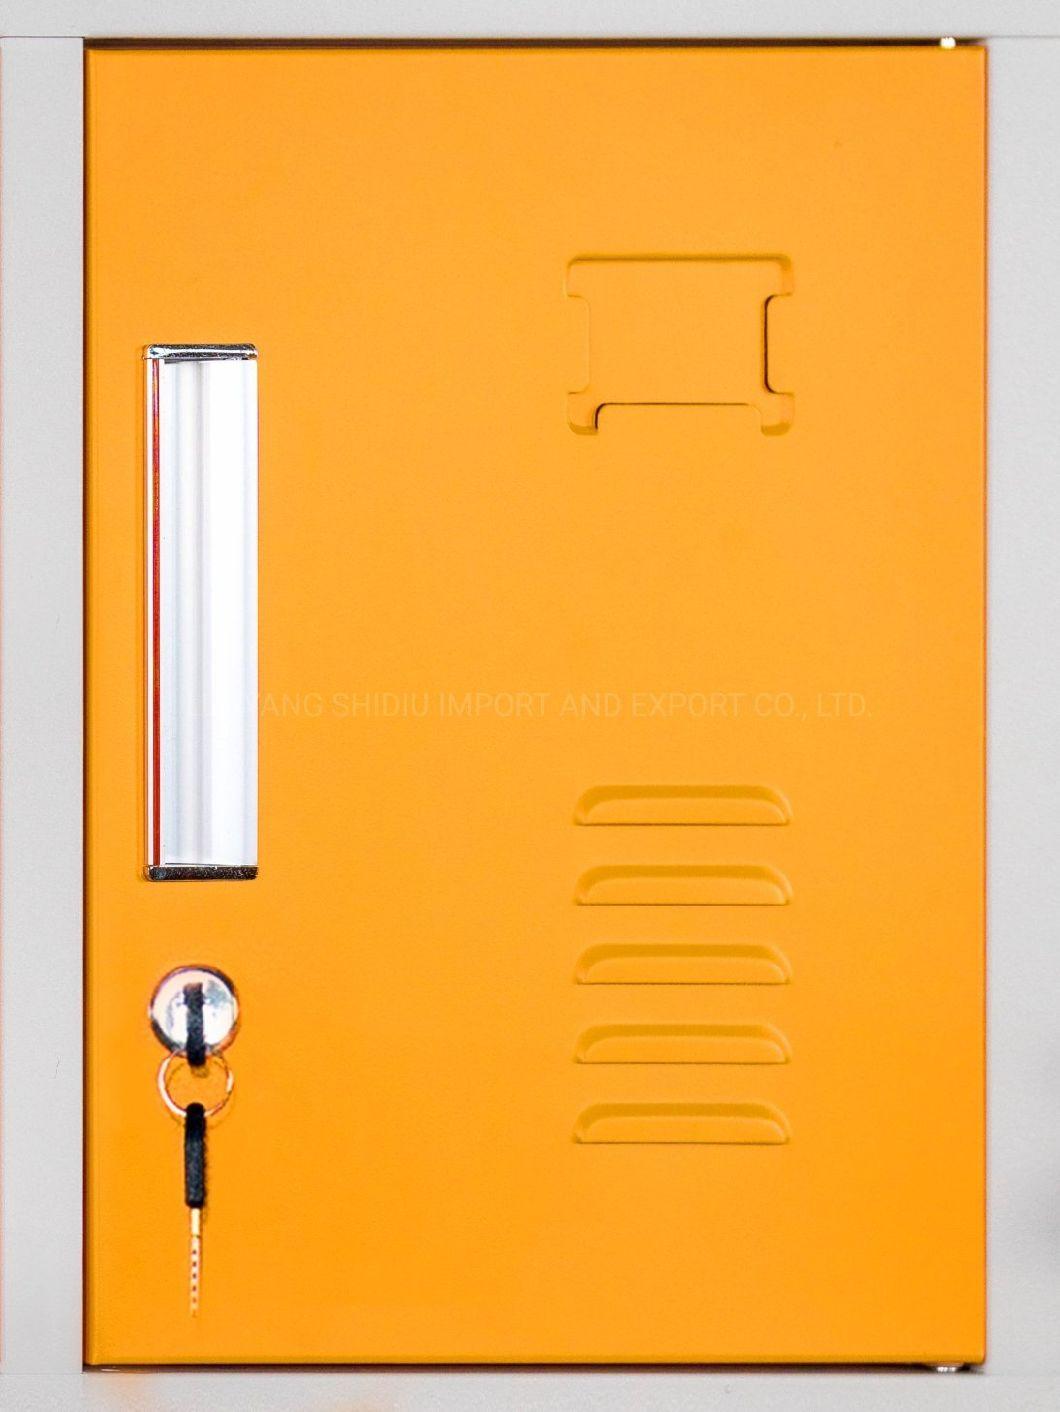 Metal Colored Tall Storage Box Tool Lockers for Public Area